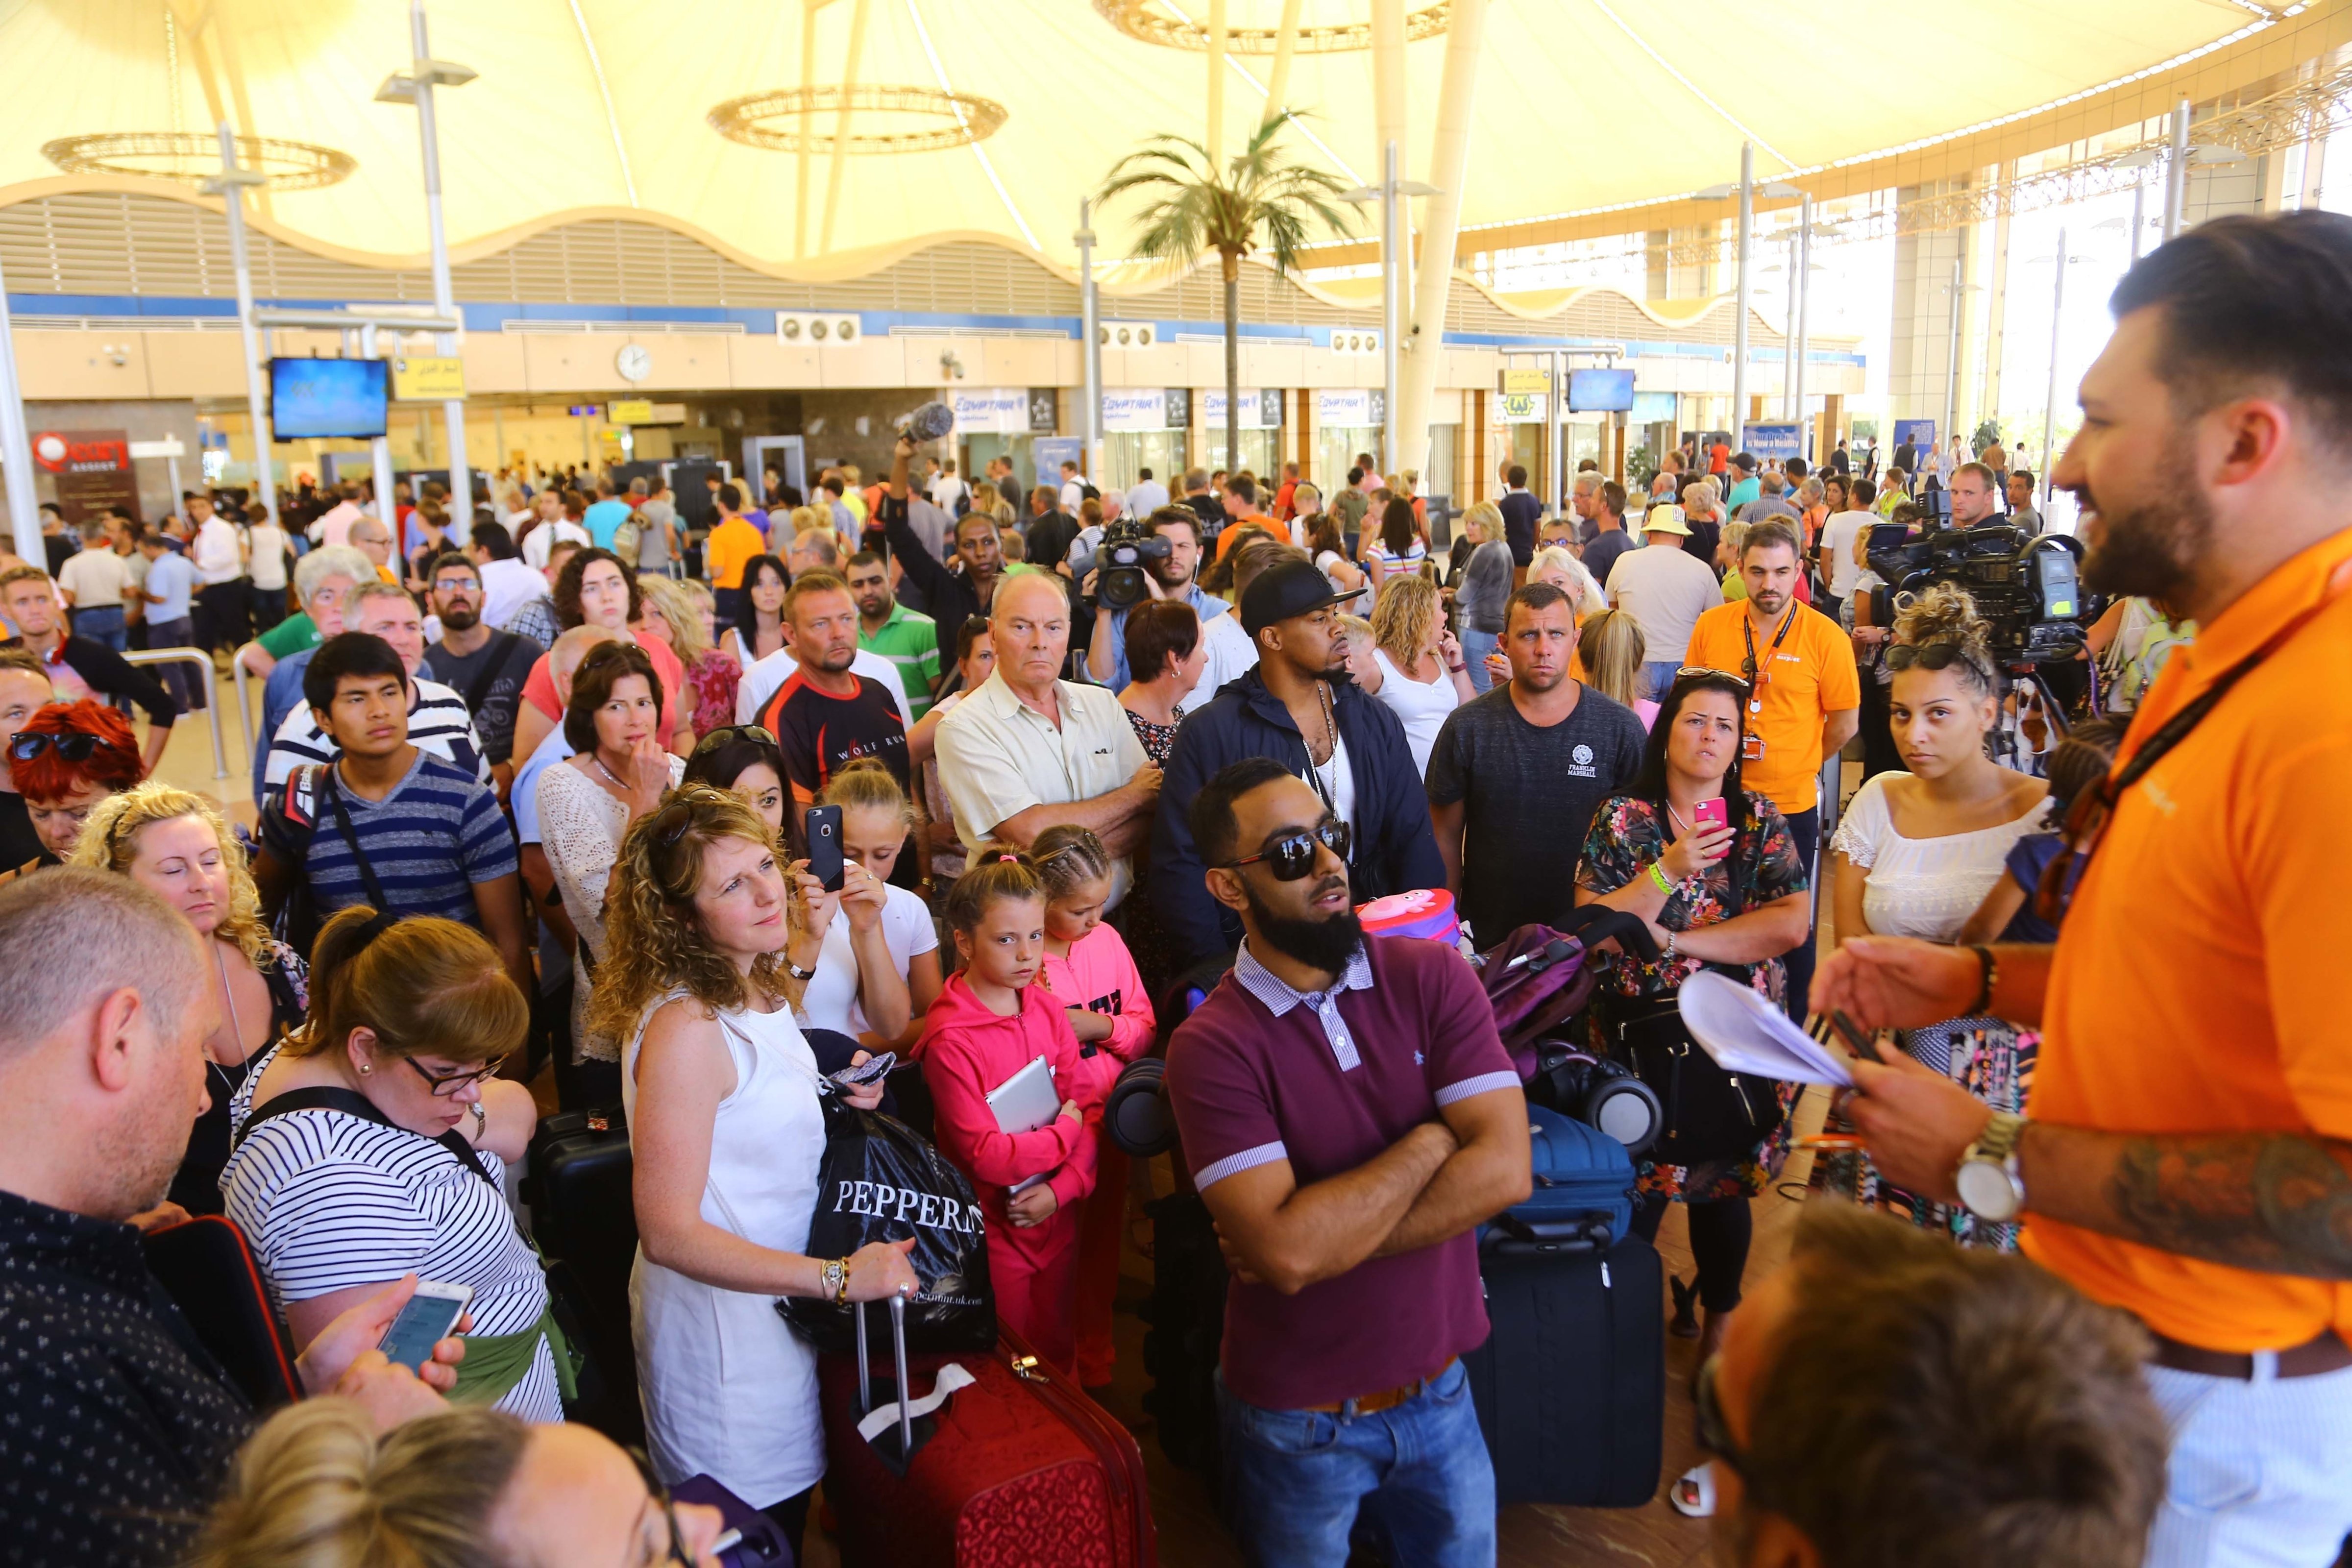 Stranded British tourists were evacuated from Sharm el-Sheikh